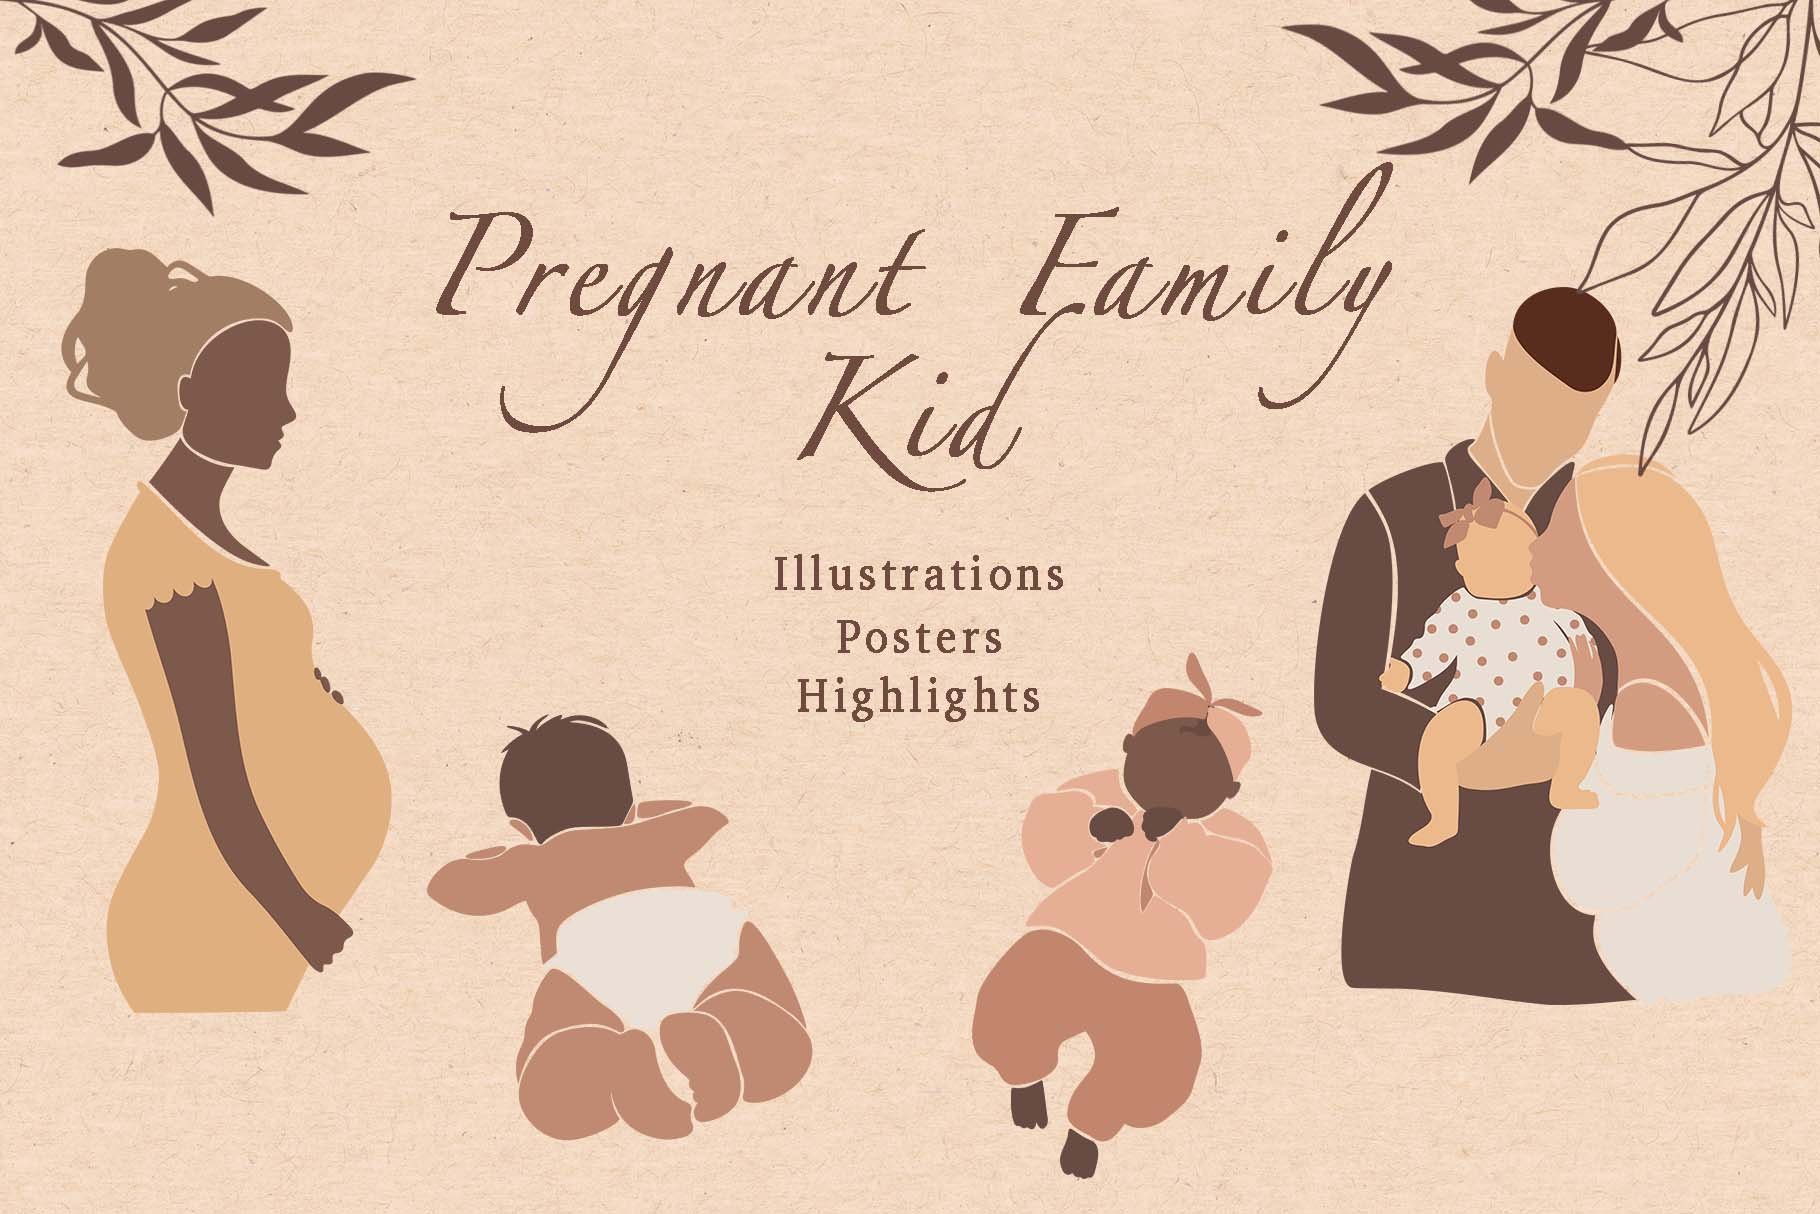 Abstract Graphic Set. Pregnant, kids cover image.